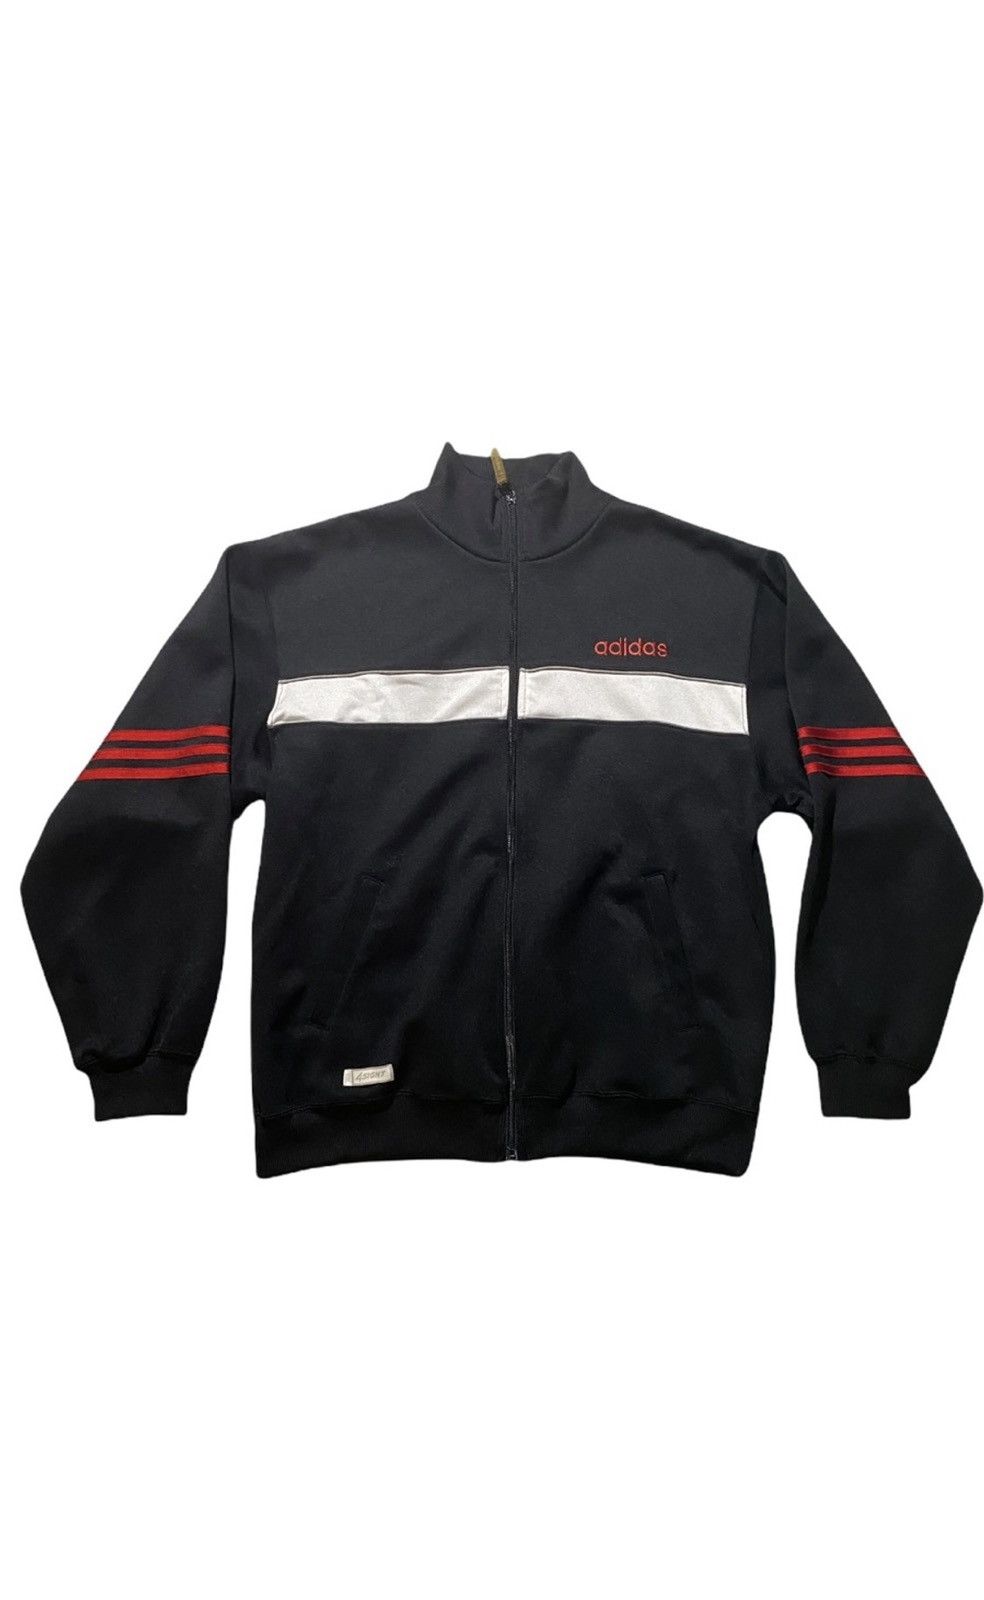 Adidas OFFER UP! Vintage Streetwear Adidas 4sight Track Jacket Size US M / EU 48-50 / 2 - 1 Preview